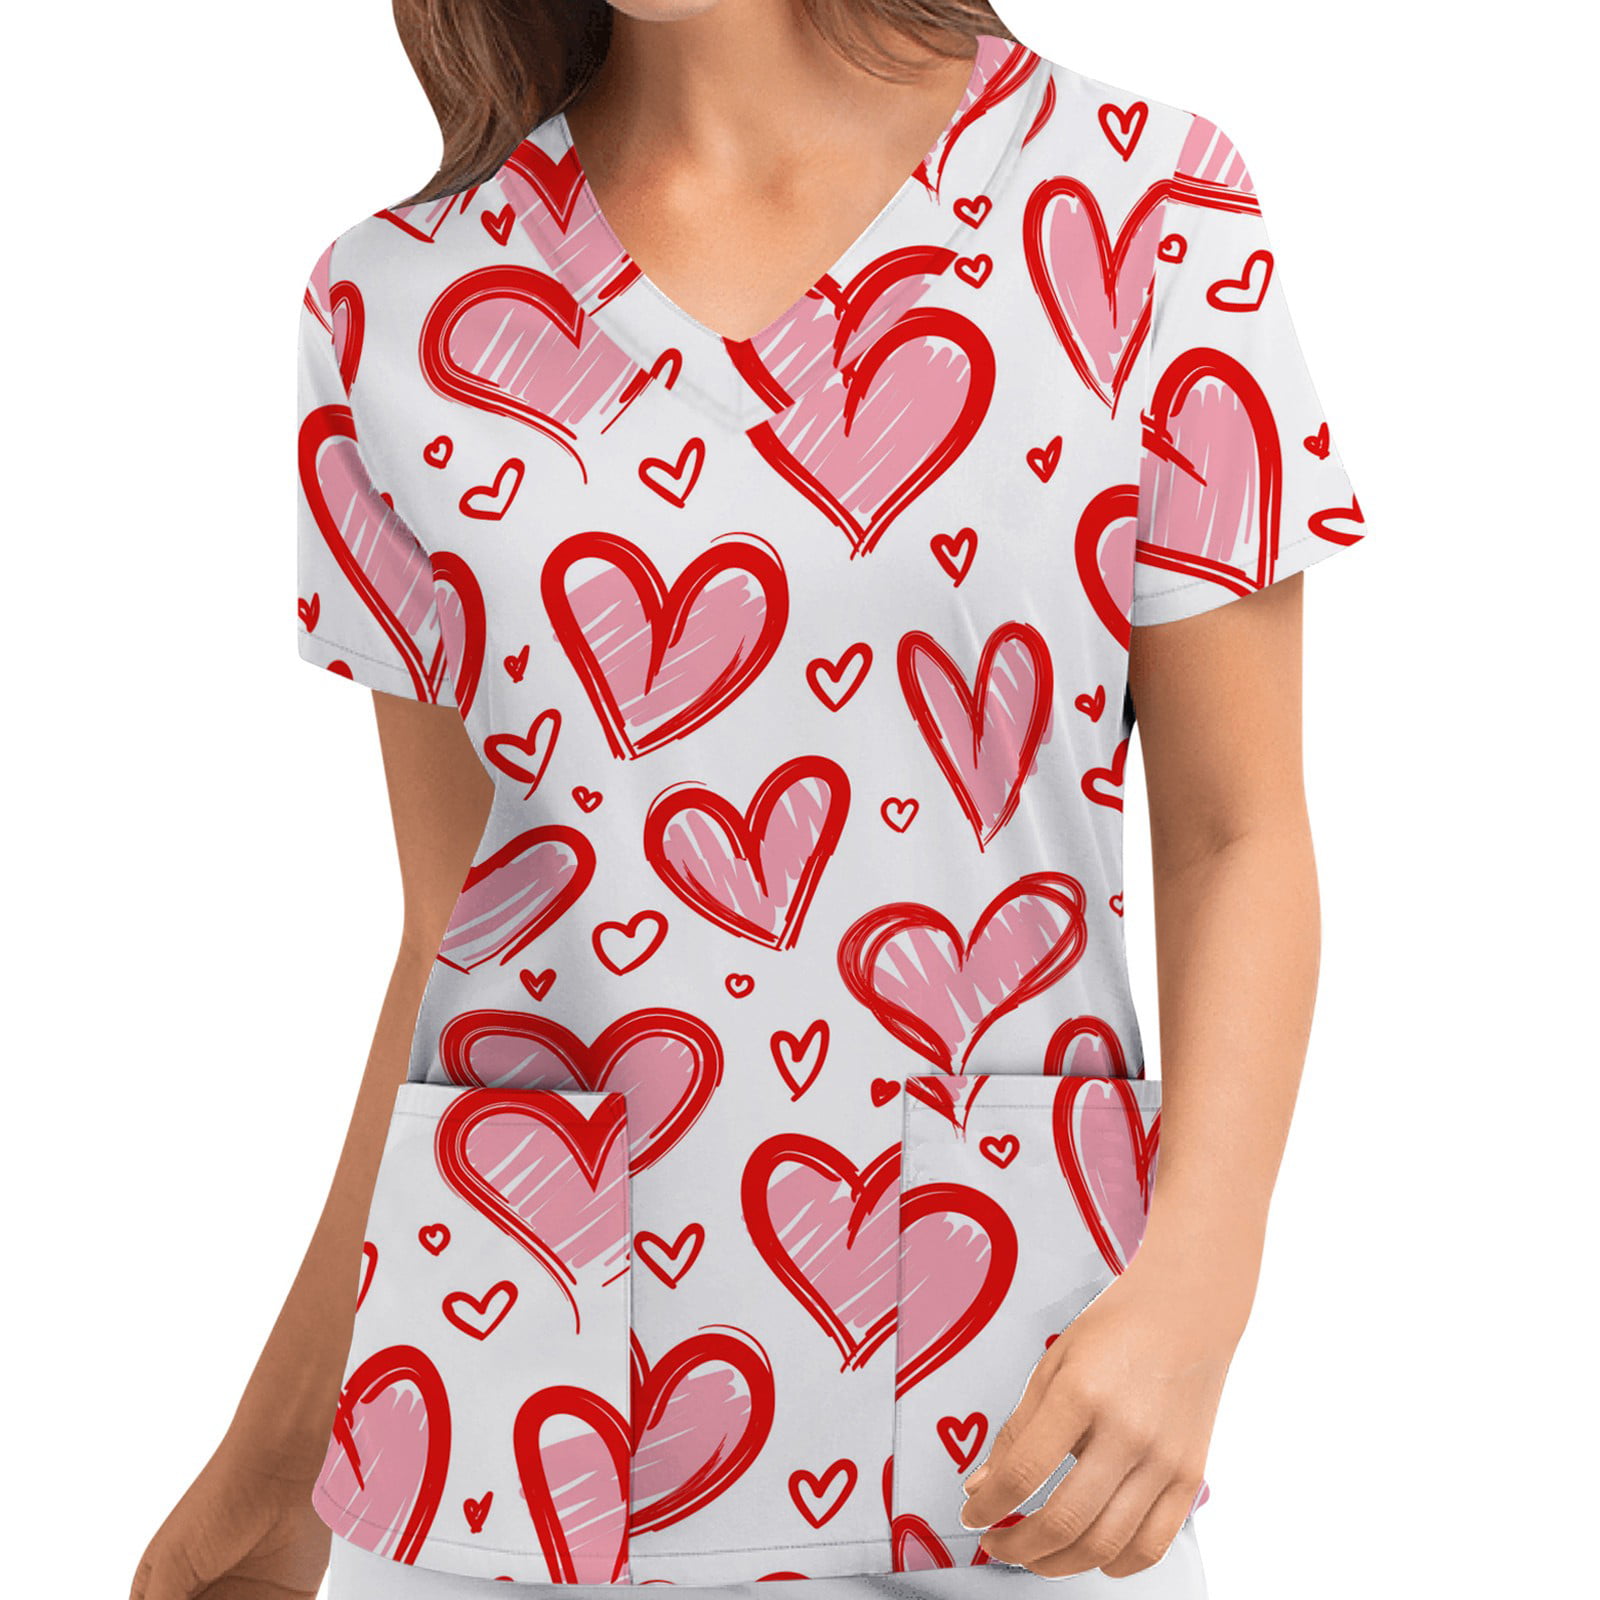 50% off Clearance! S LUKKC LUKKC Valentine's Day Scrub Tops, Gifts for ...